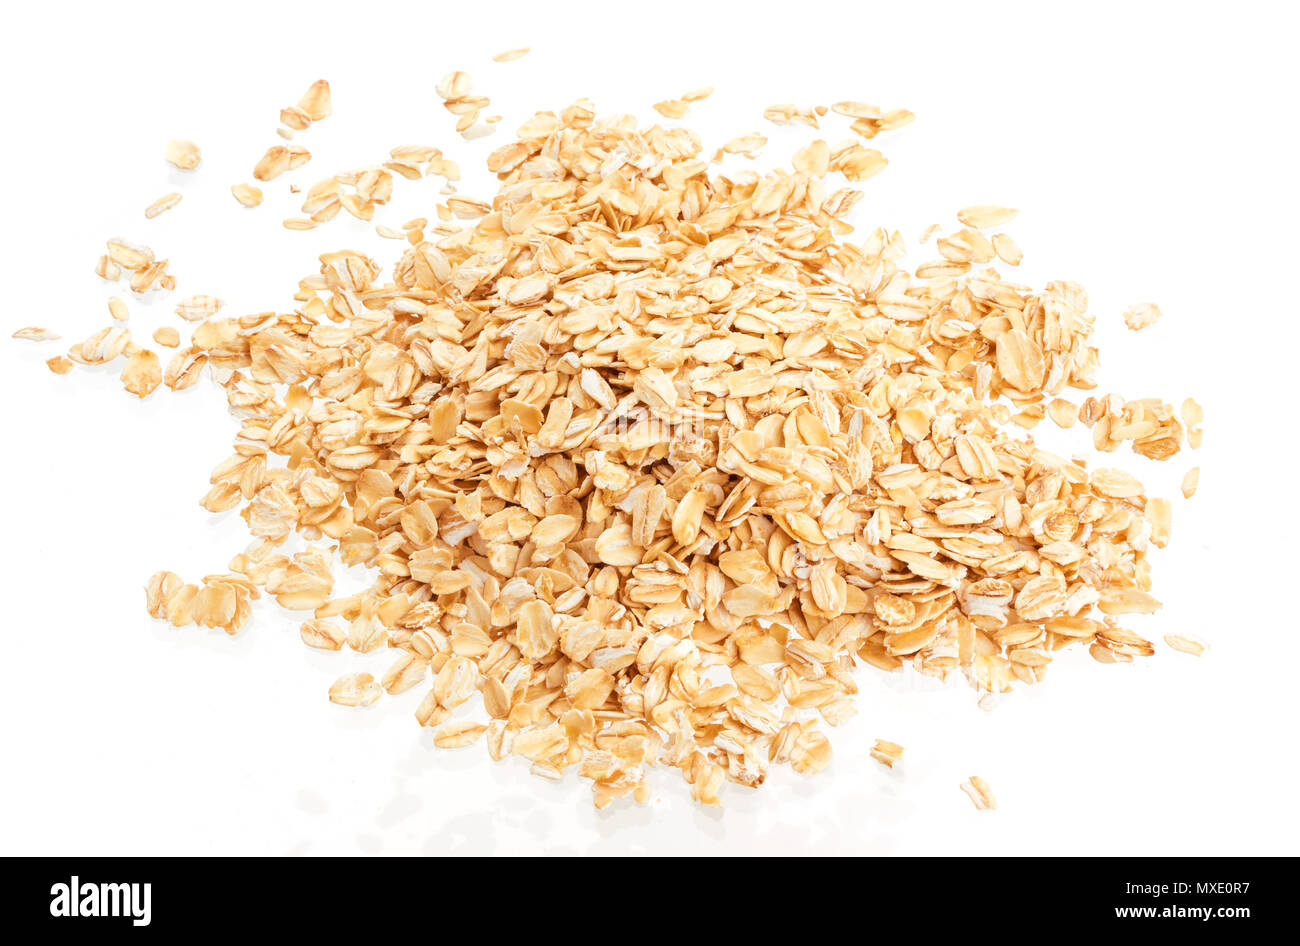 Pile of oat flakes isolated on white background. Top view Stock Photo